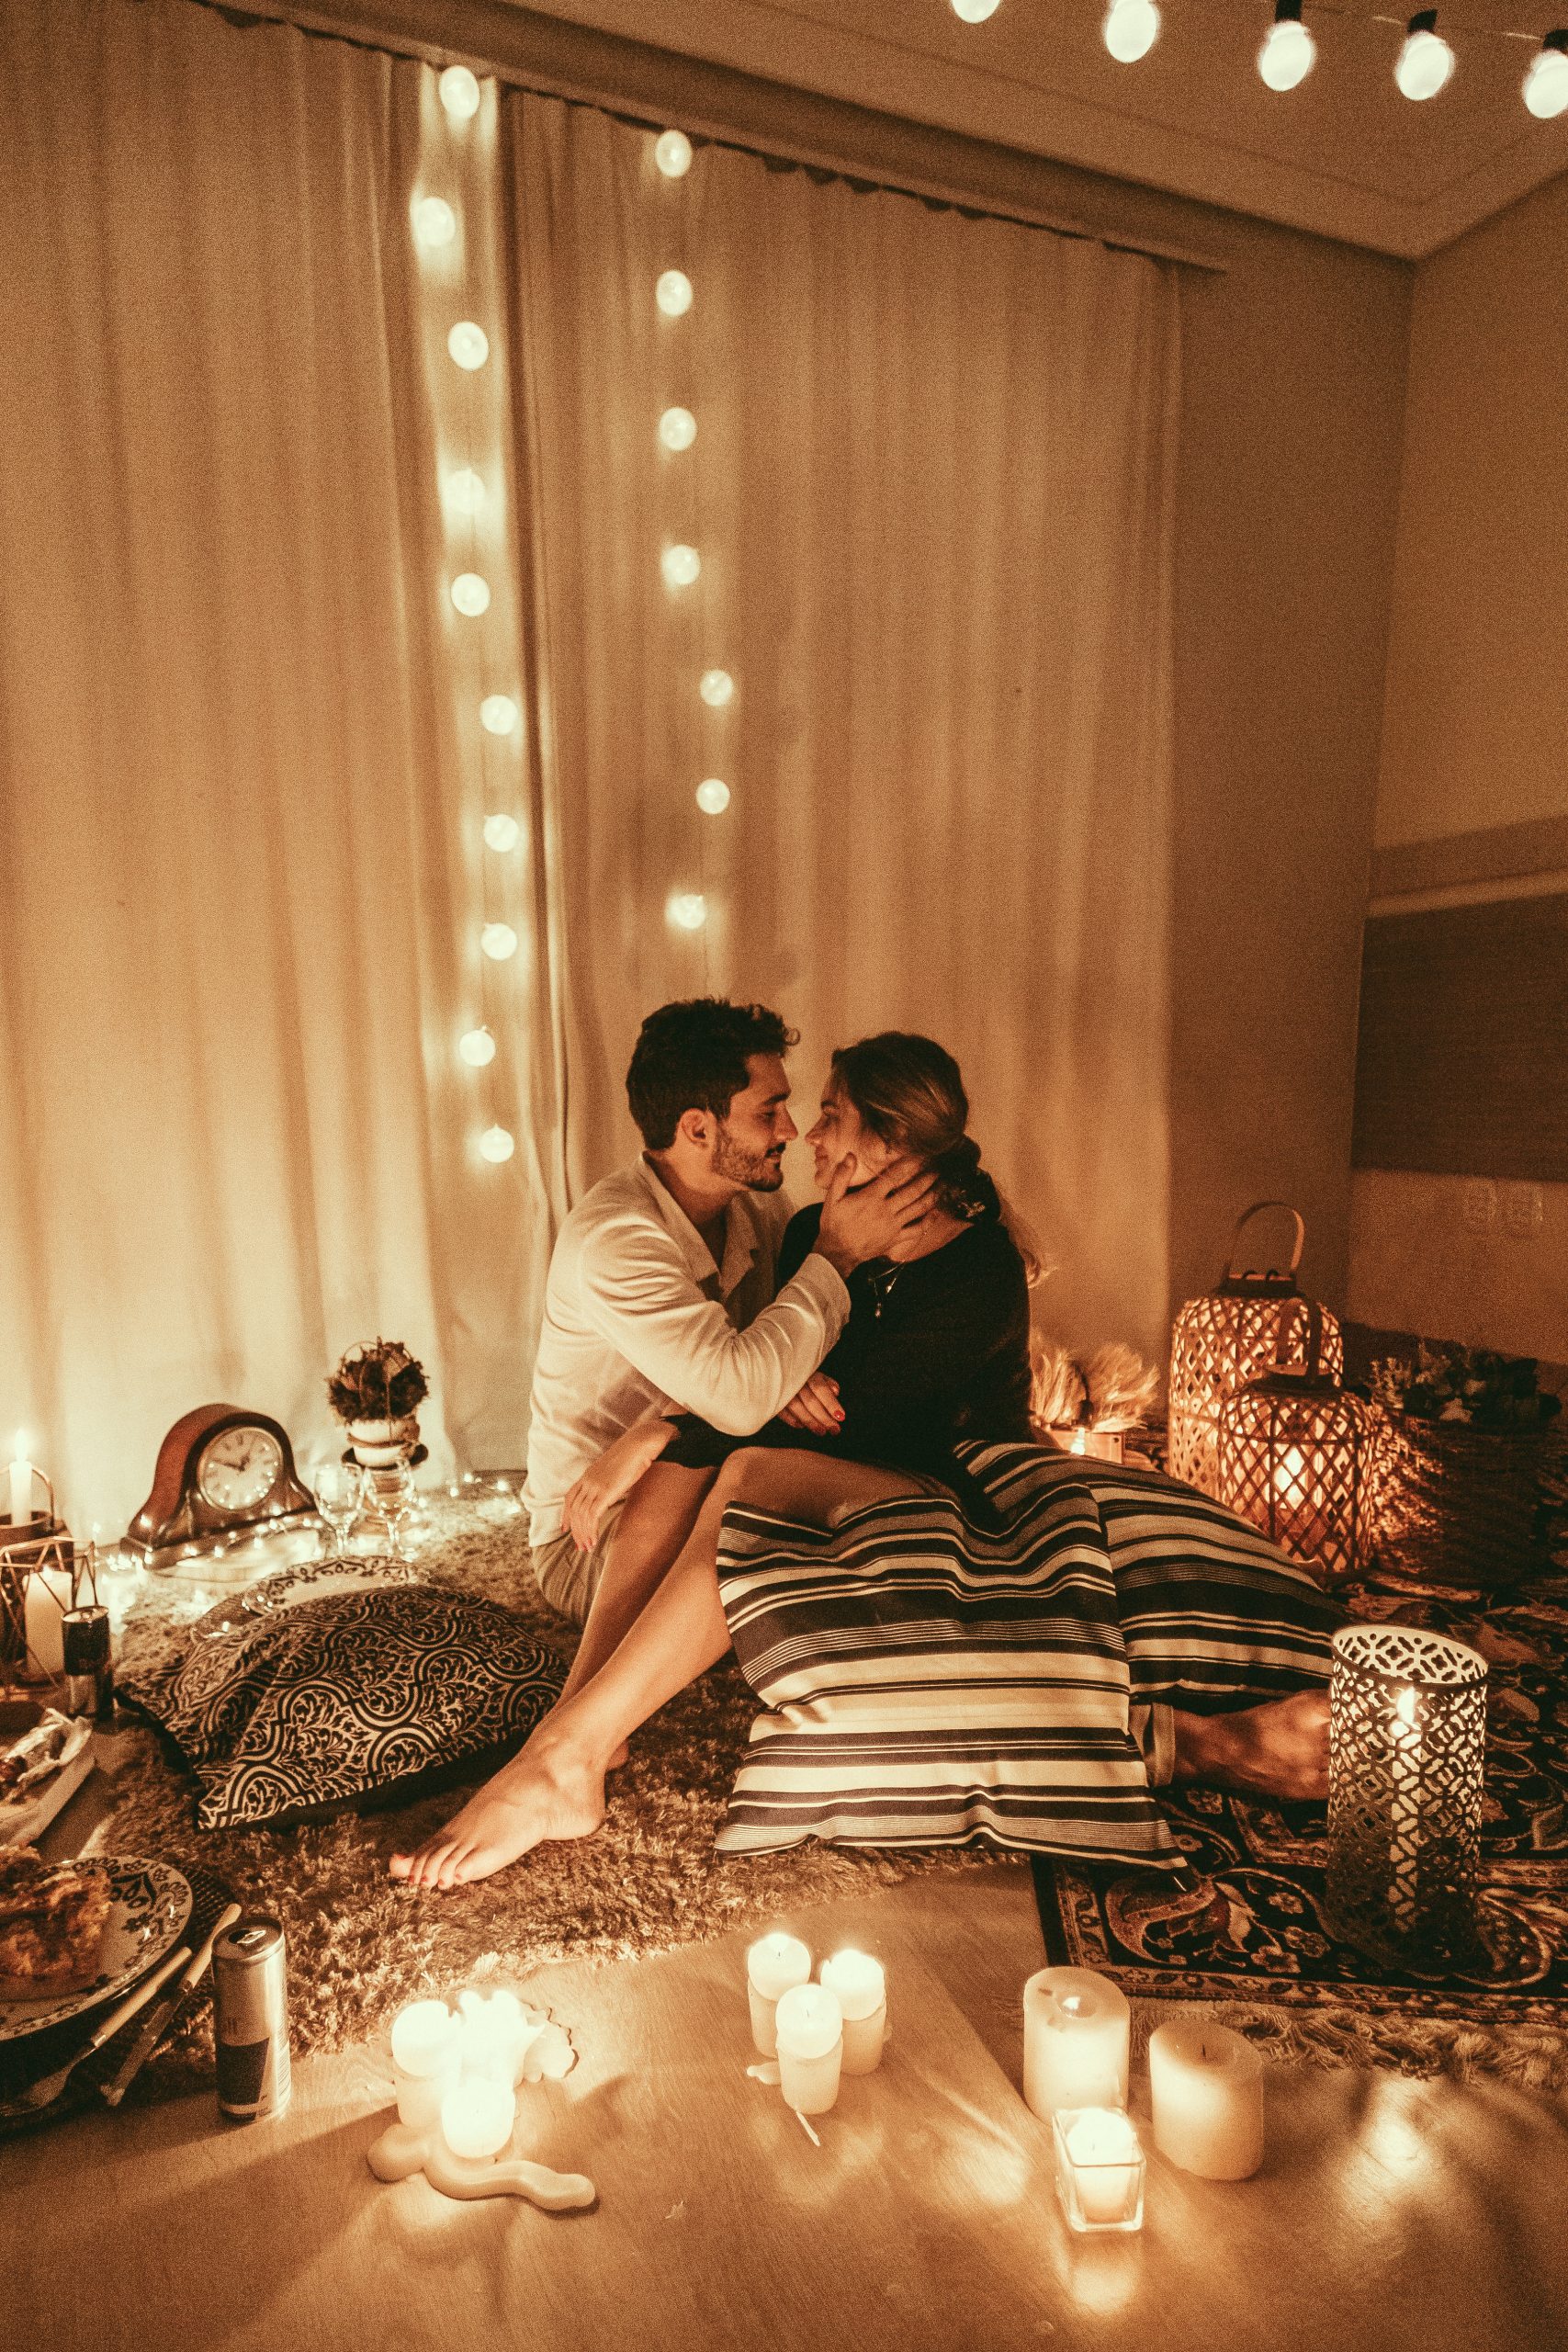 at home date ideas
couple in romantic fort
source: jonathansborba from Pexels